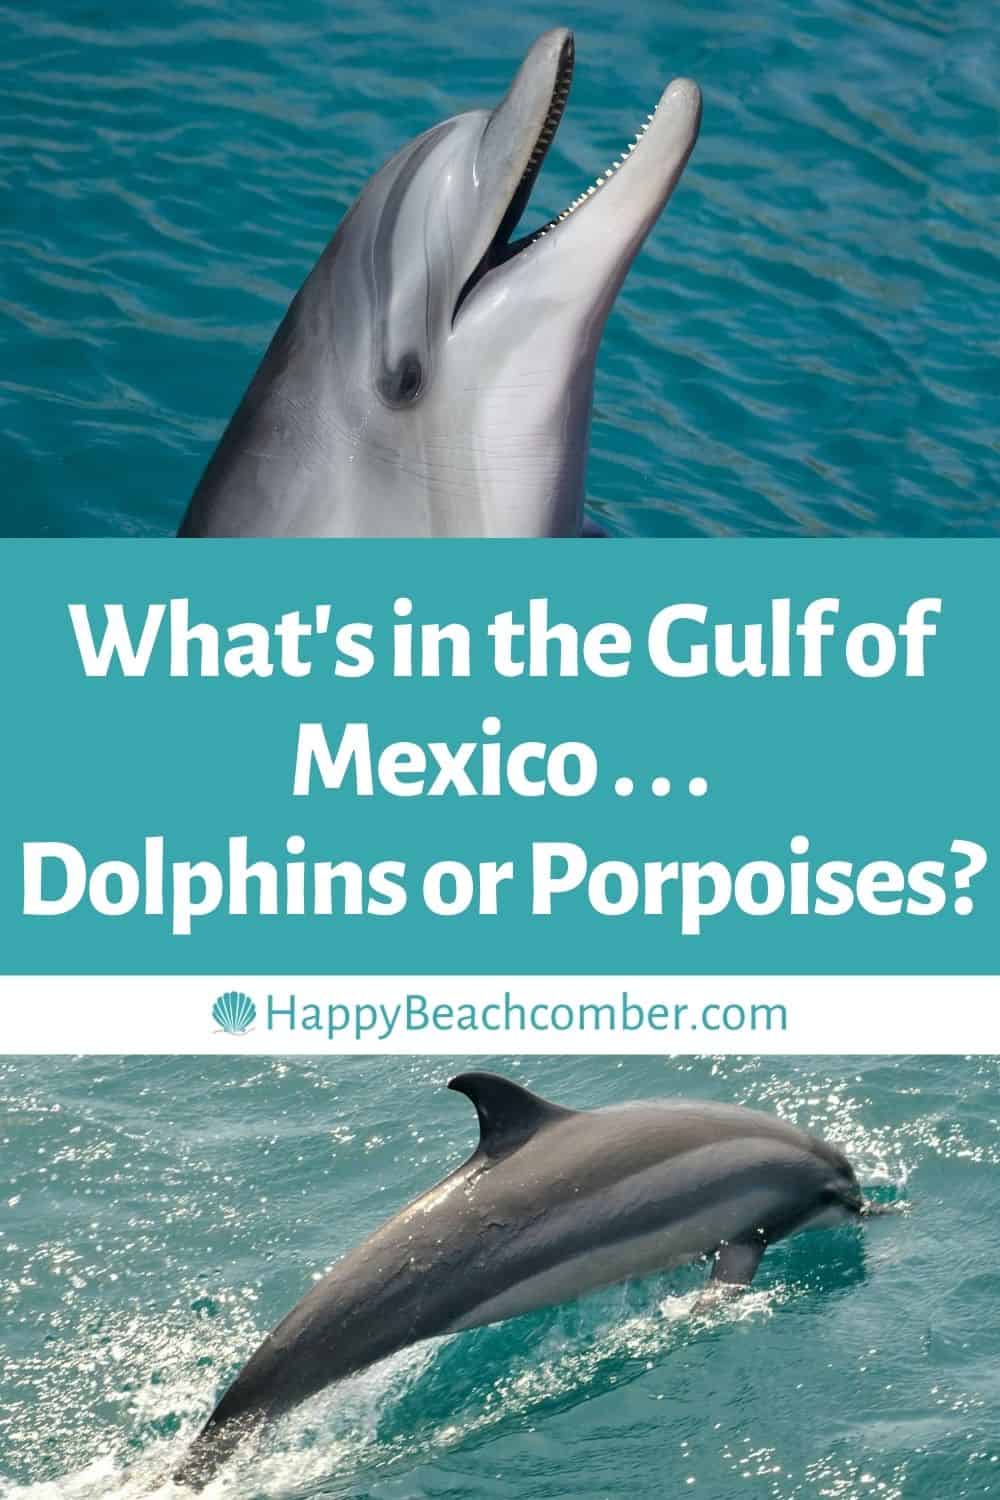 What's in the Gulf of Mexico ... Dolphins or Porpoises?